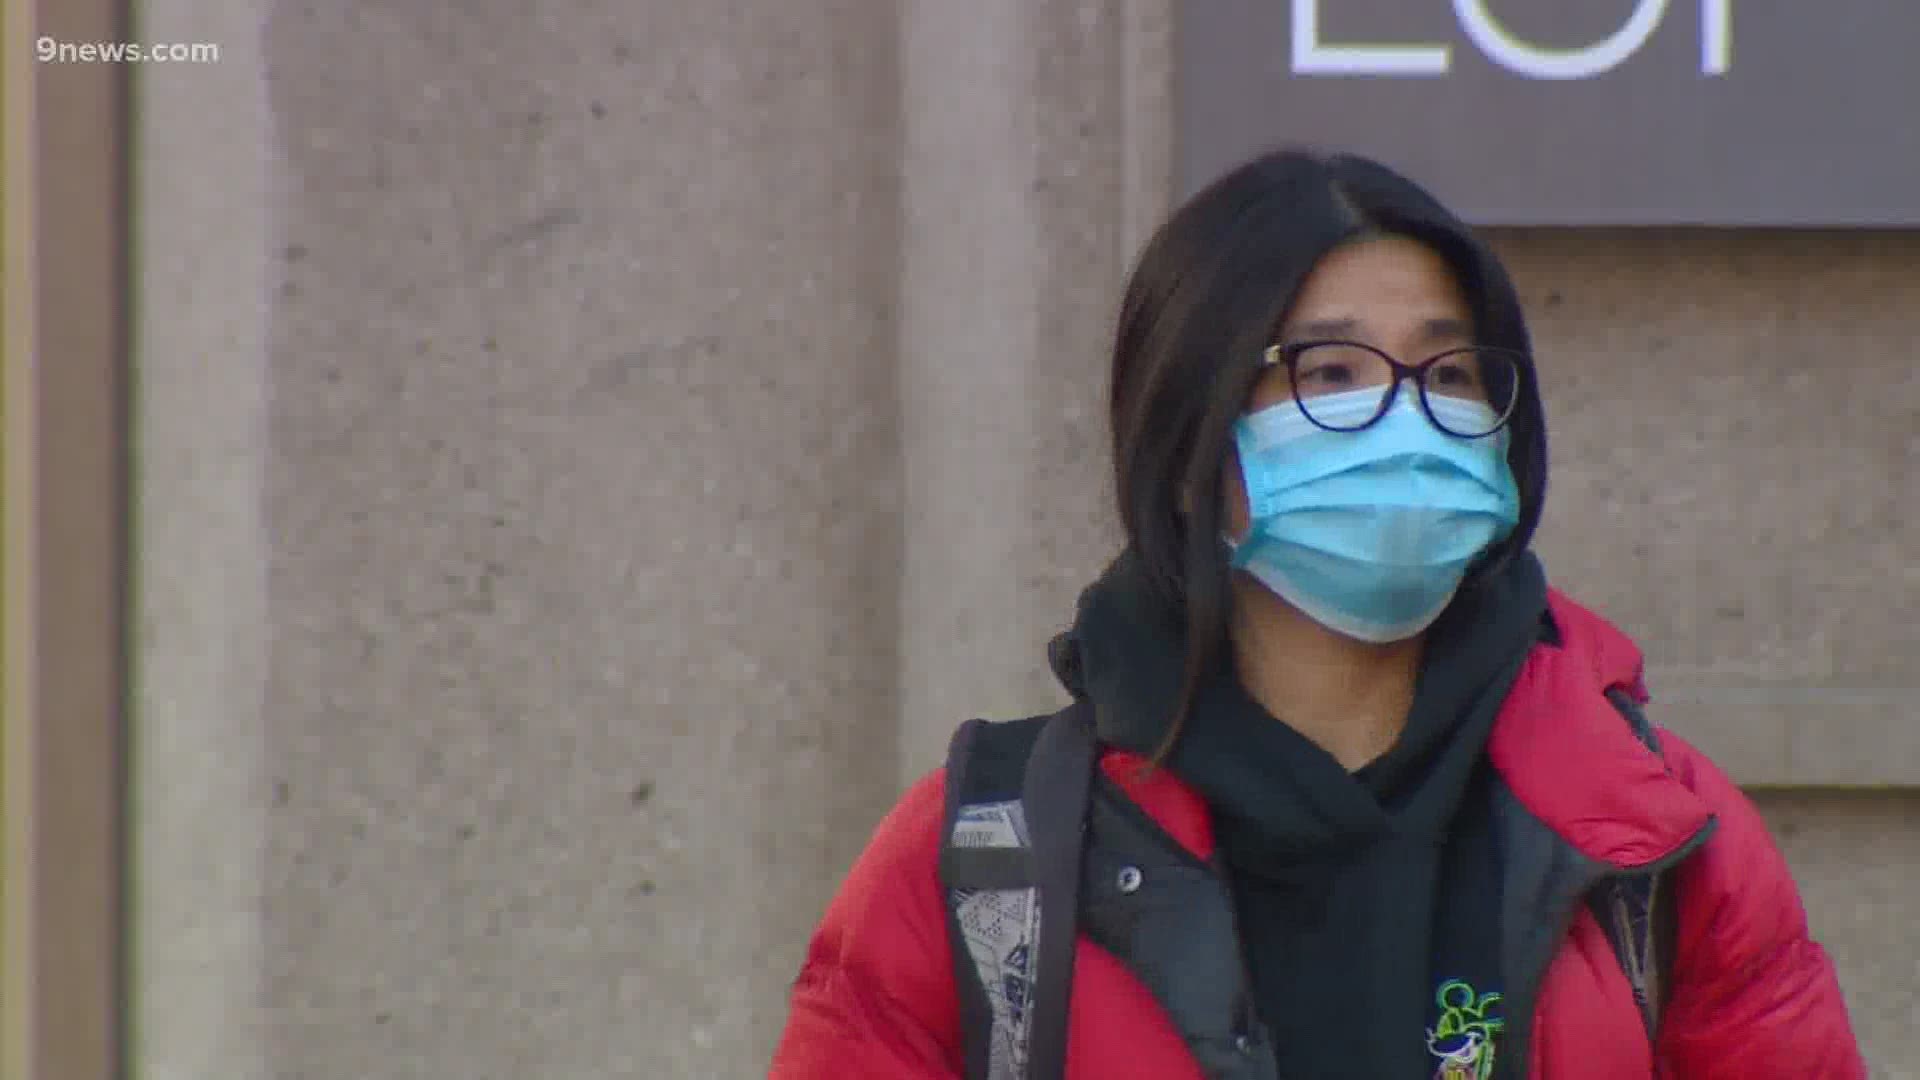 9Health Expert Dr. Payal Kohli and 9NEWS Psychology Expert Dr. Max Wachtel explain why masks will likely be necessary post-pandemic.